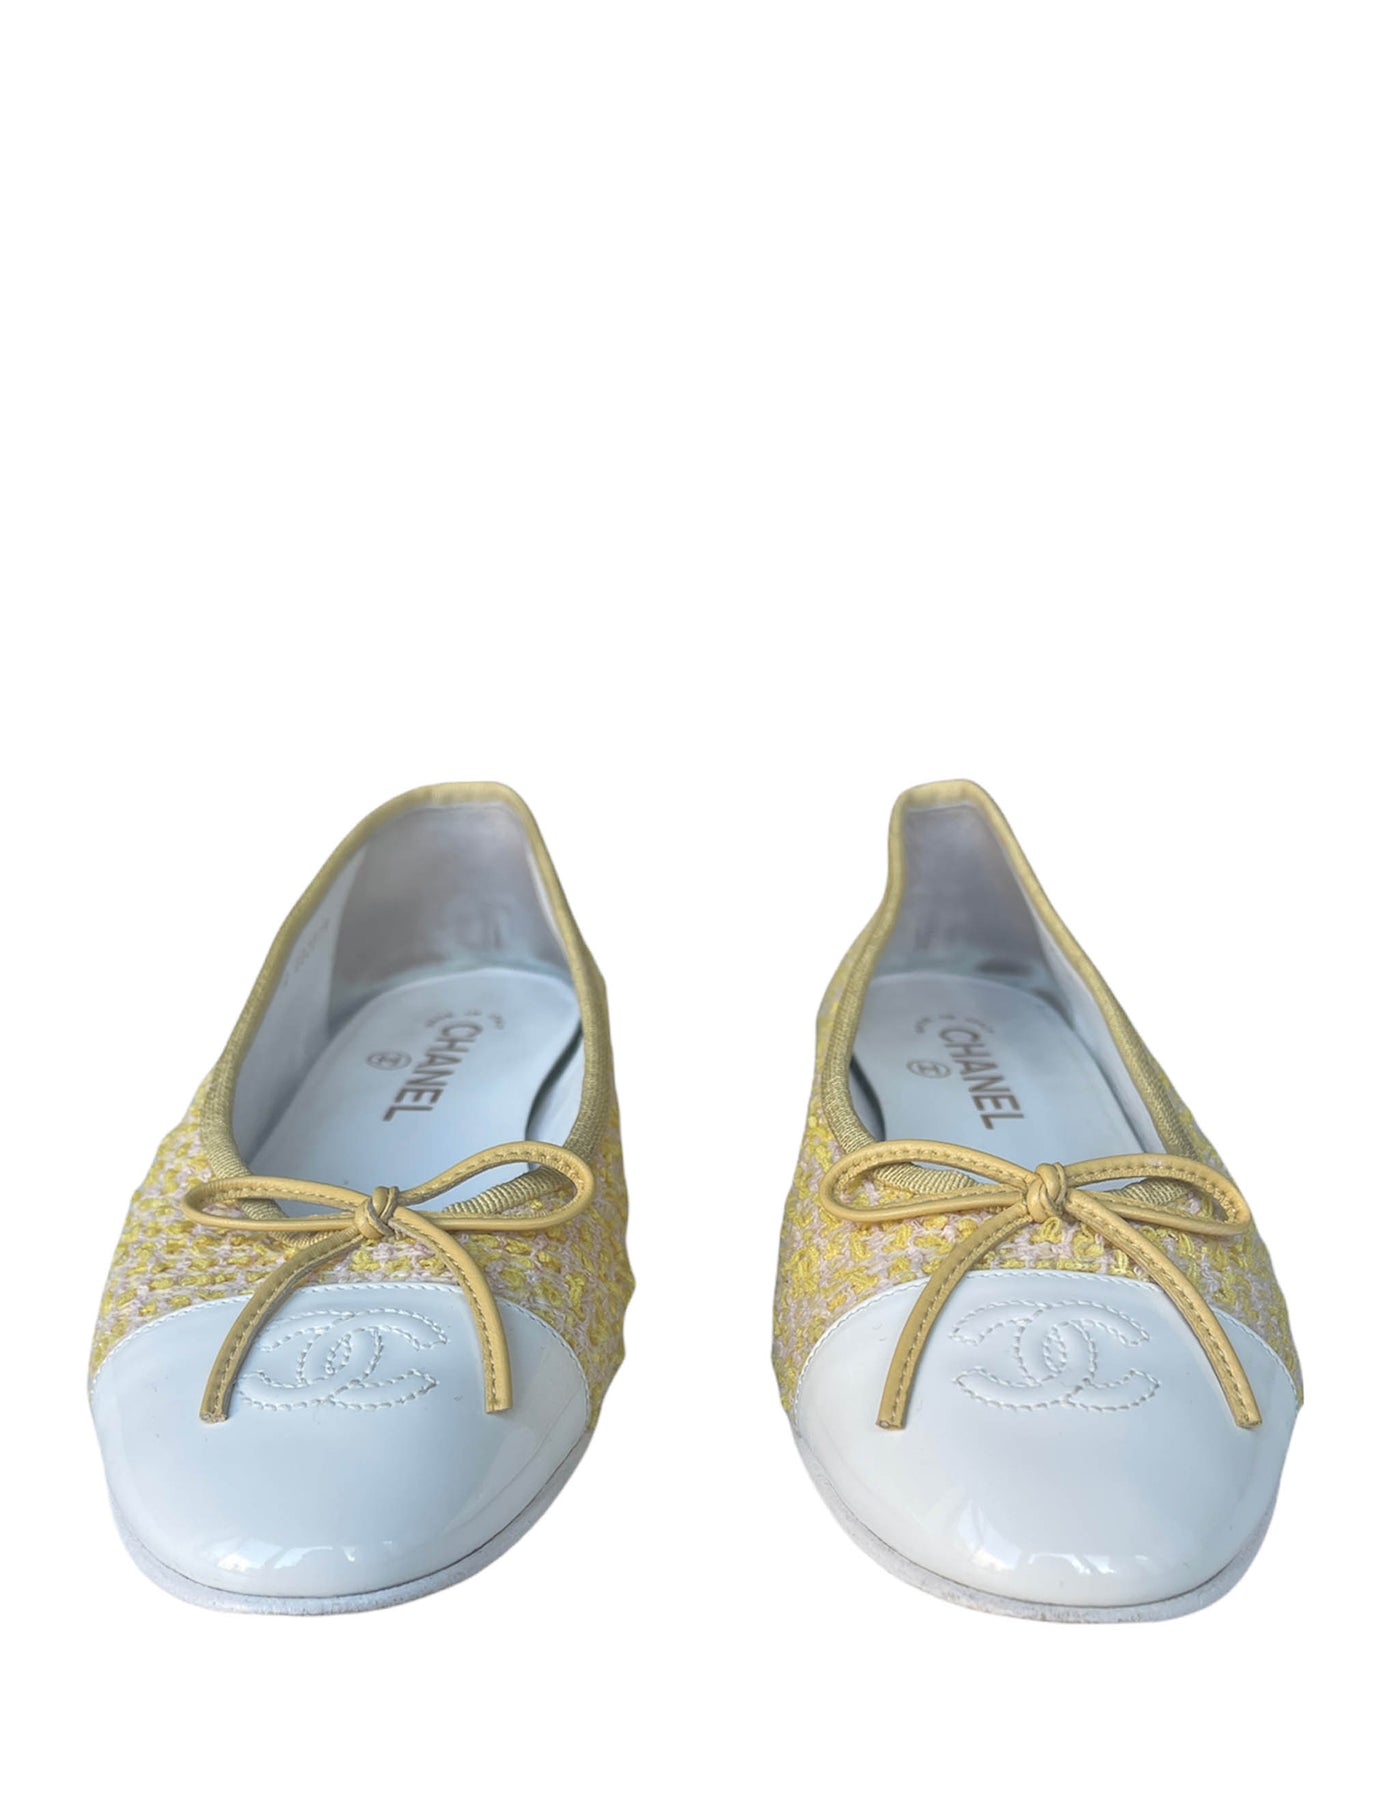 Chanel Ballet Flat Made in Italy Neutral G26250 Pebbled Toe Bow Ballerina 39  1/2